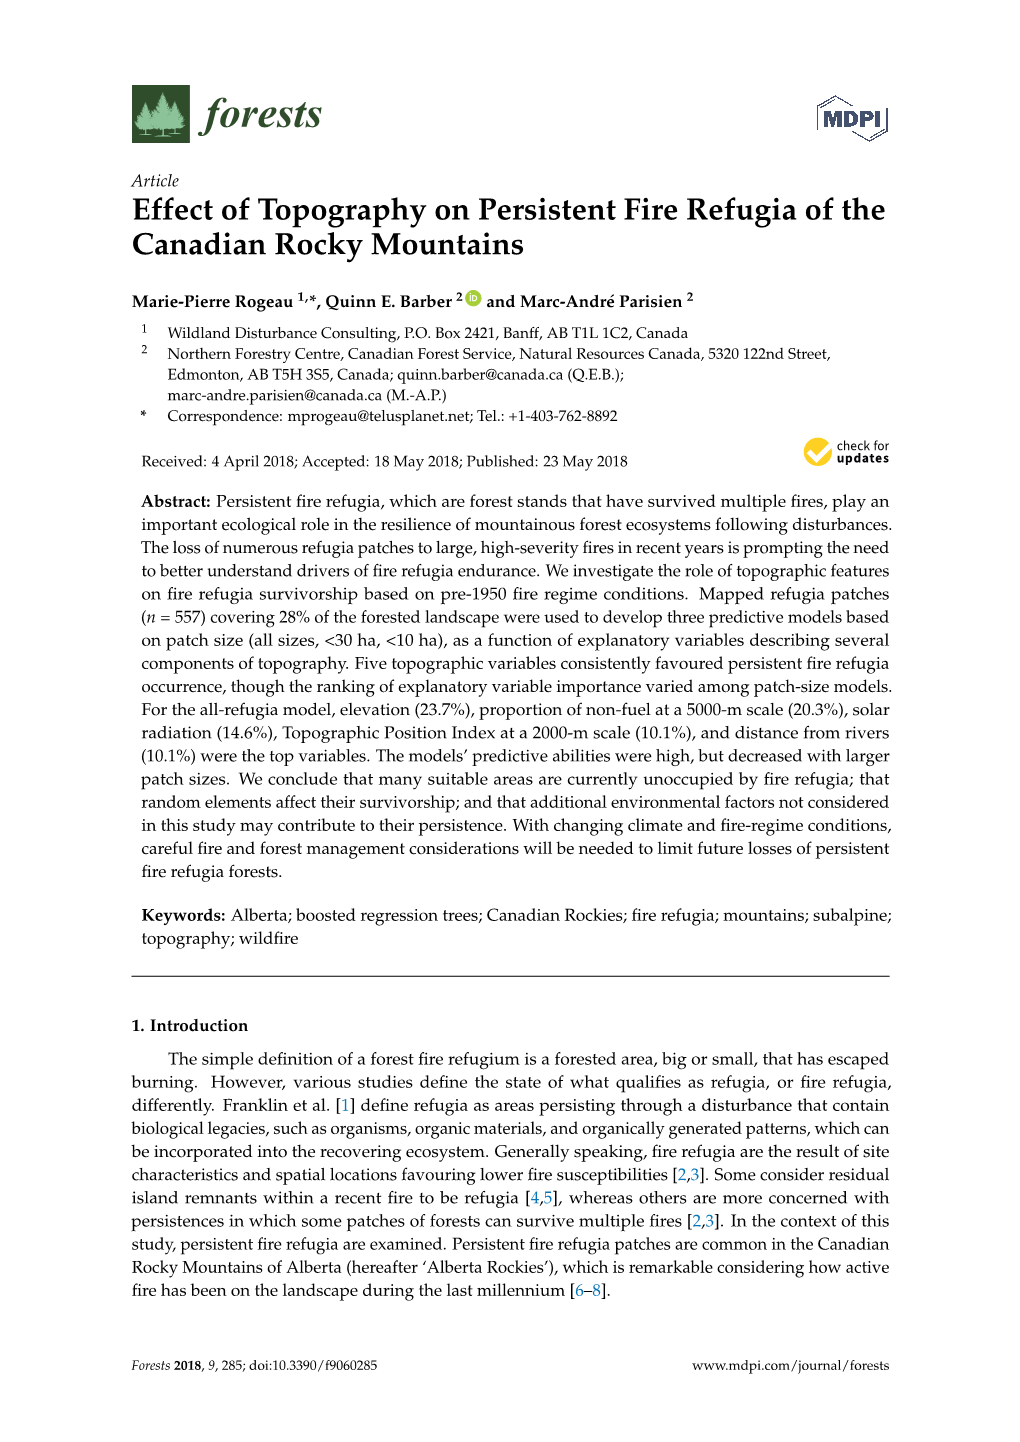 Effect of Topography on Persistent Fire Refugia of the Canadian Rocky Mountains